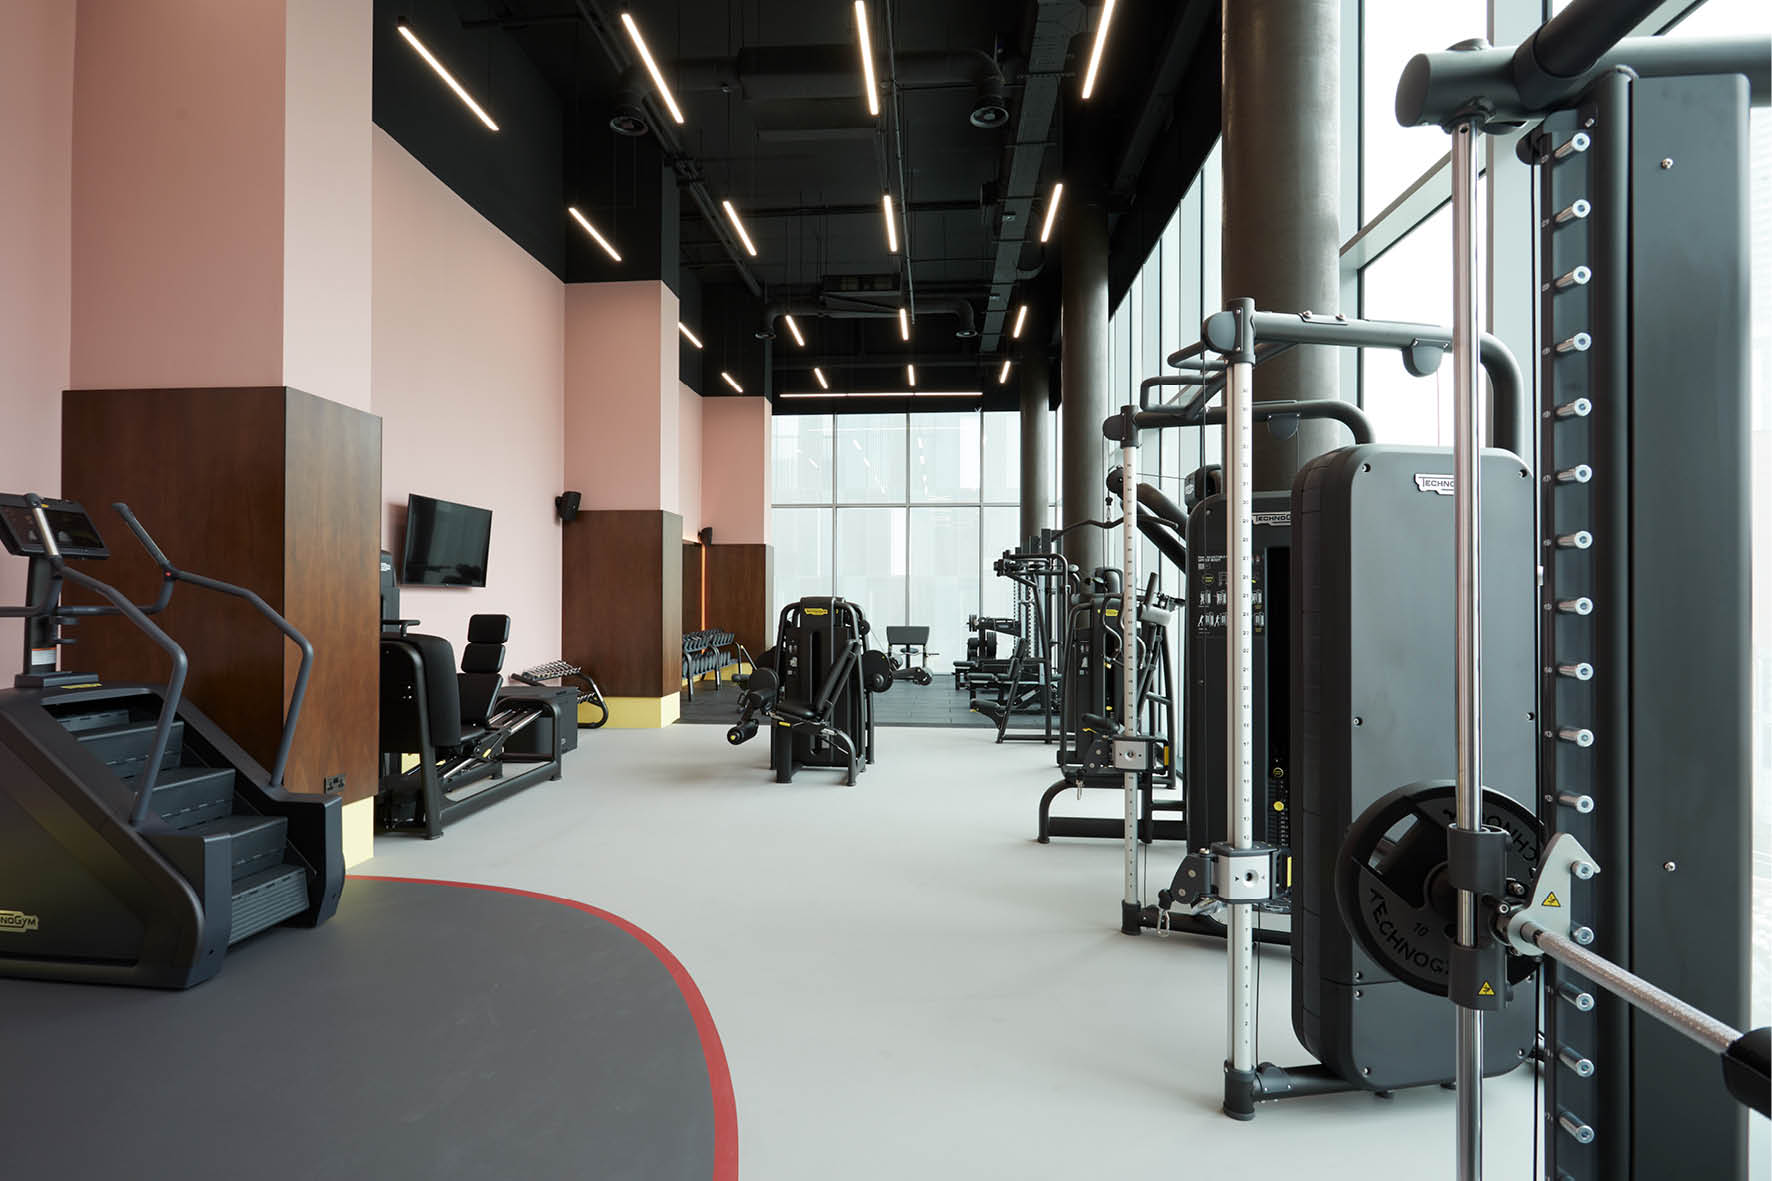 The Gym is one of many amenities at Deansgate Square